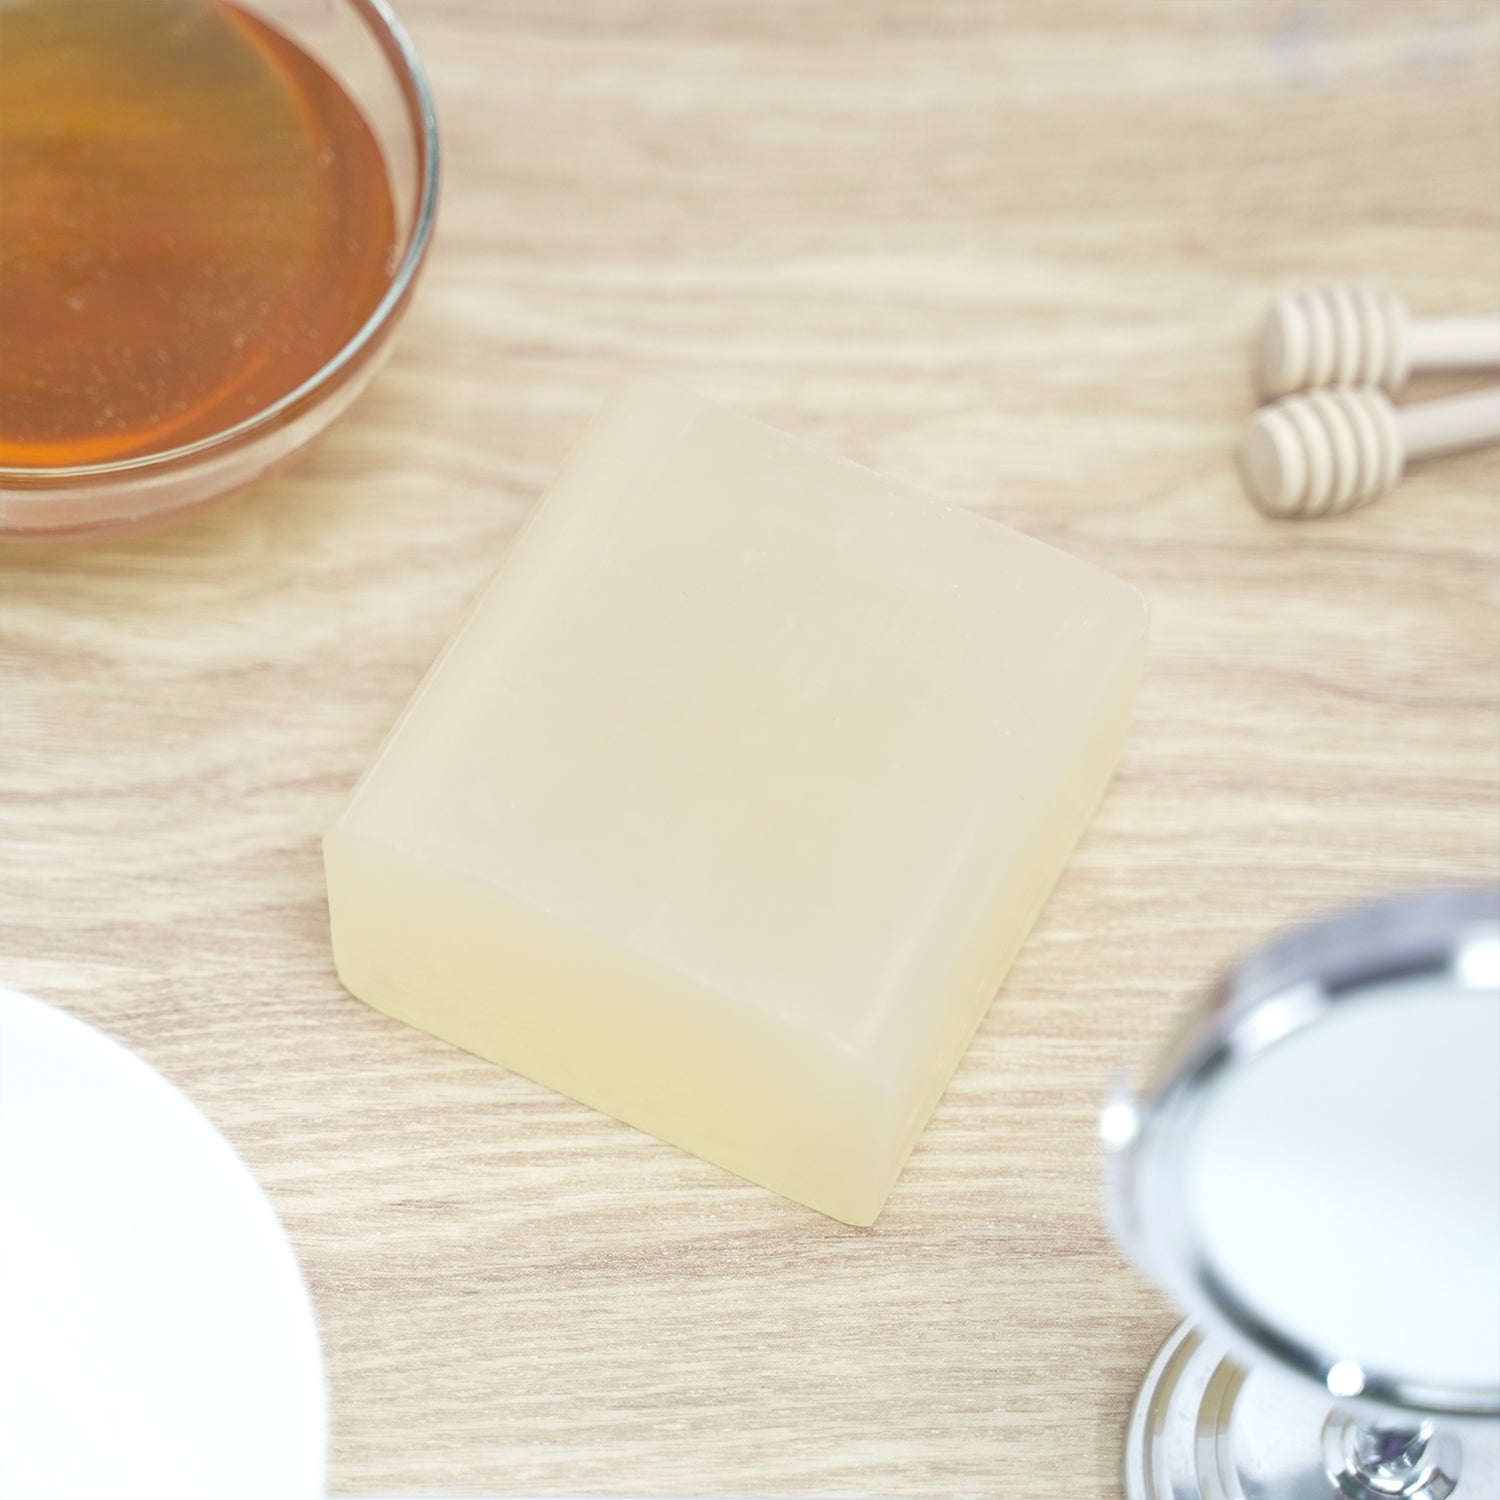 Guide for Adding Honey to Melt and Pour Soap – Craftiviti